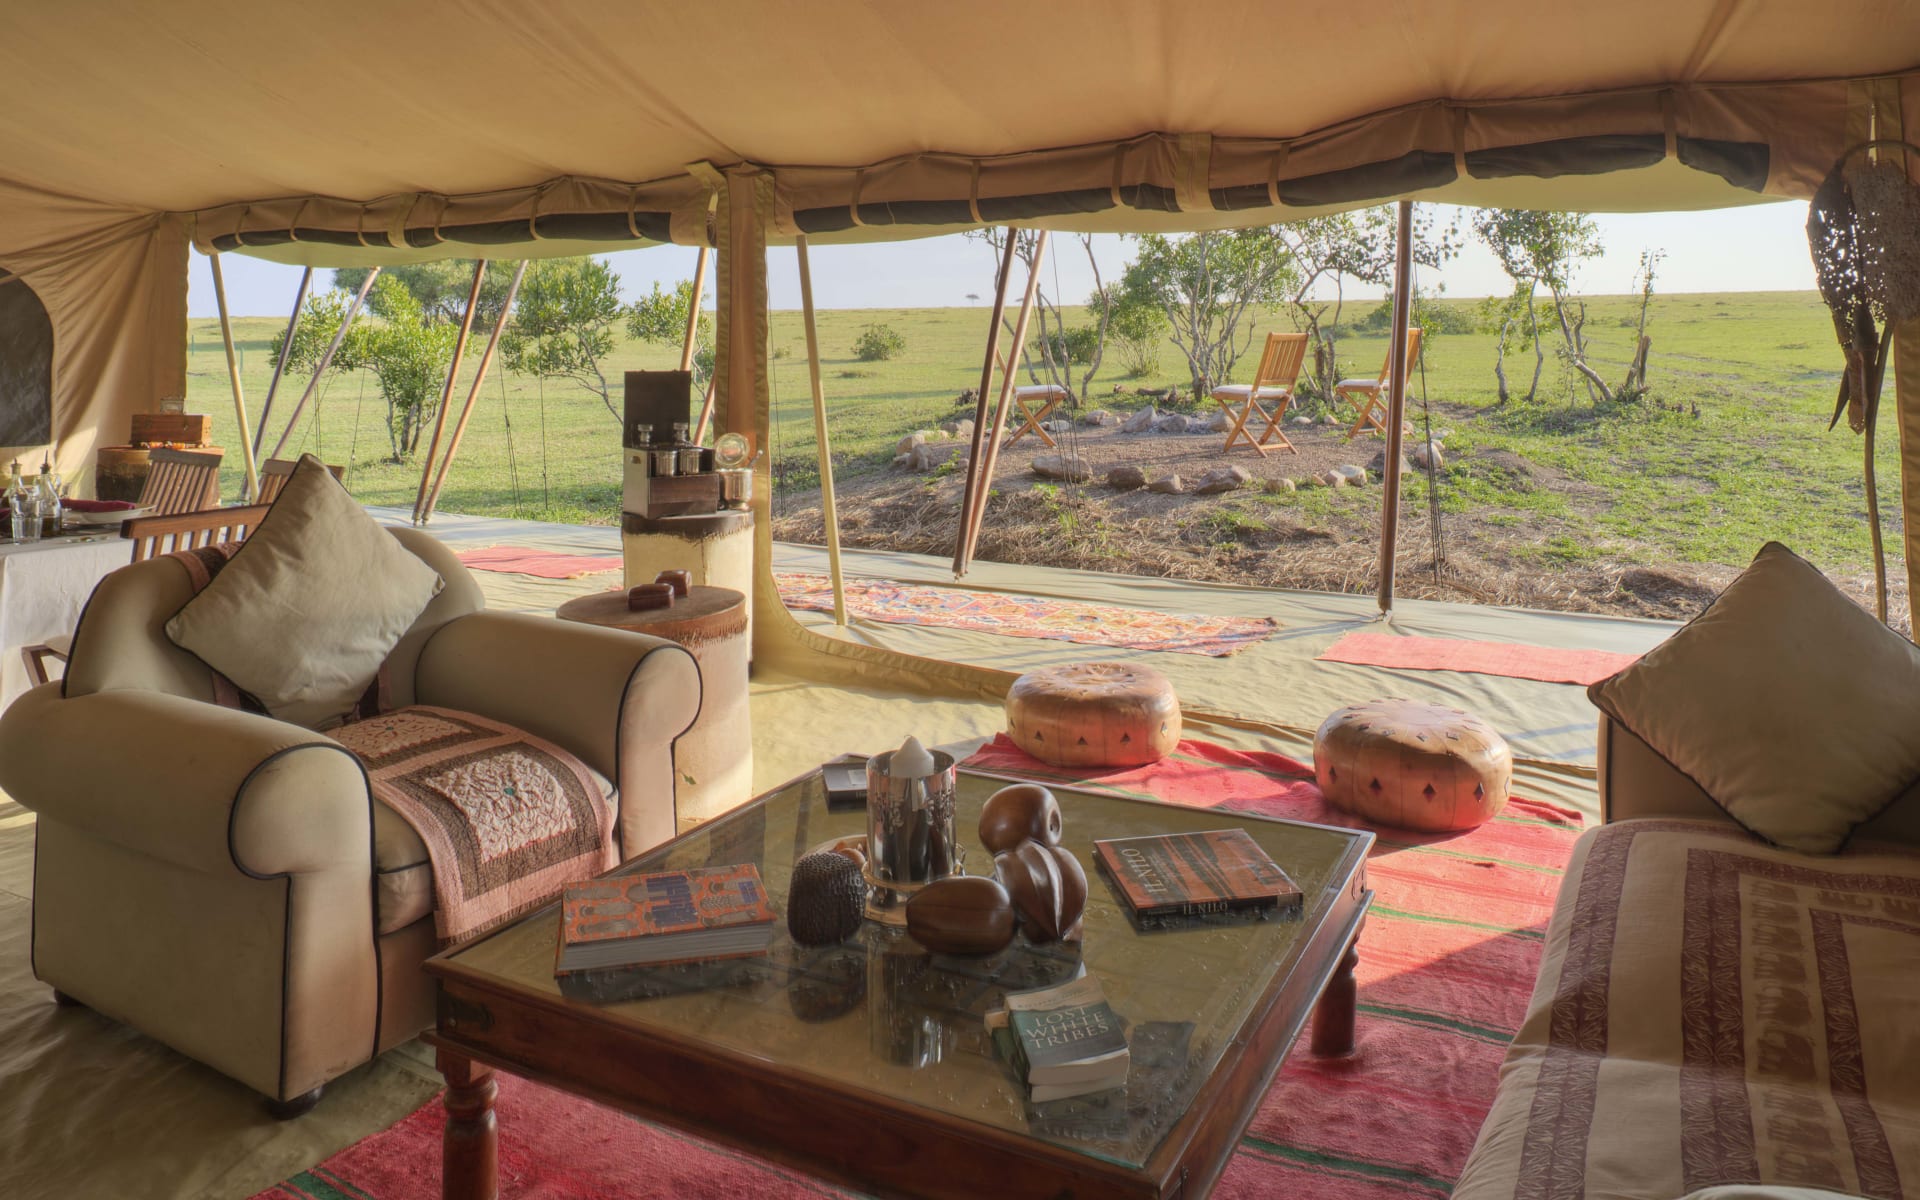 saruni_wild_-_the_dining_area_has_wonderful_views_of_the_plains_msf3lc